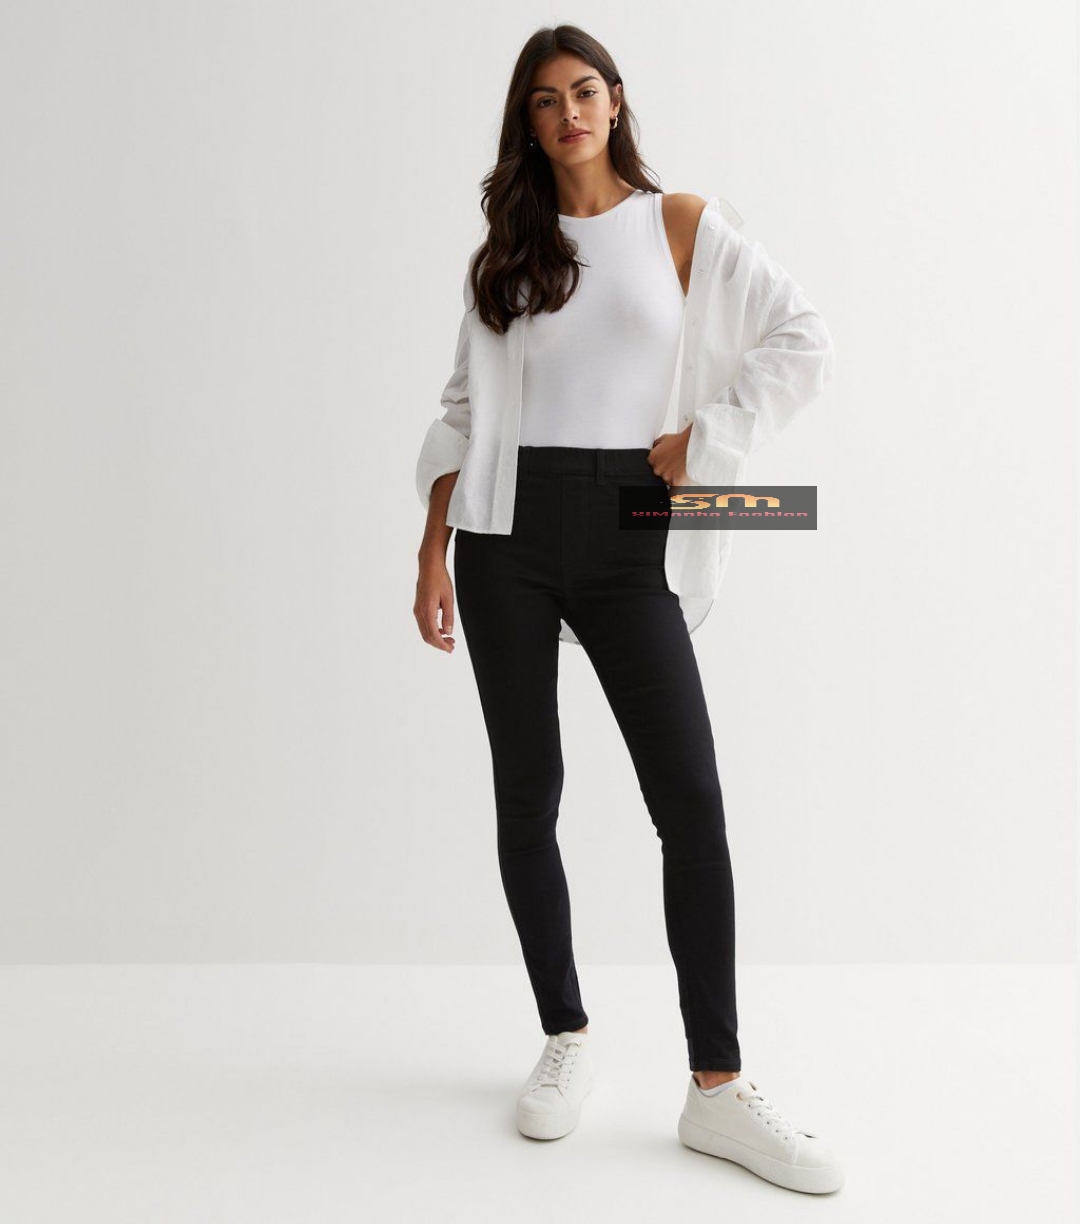 Grey Casual Jegging Skinny Pants Online Shopping OXXOSHOP, 54% OFF